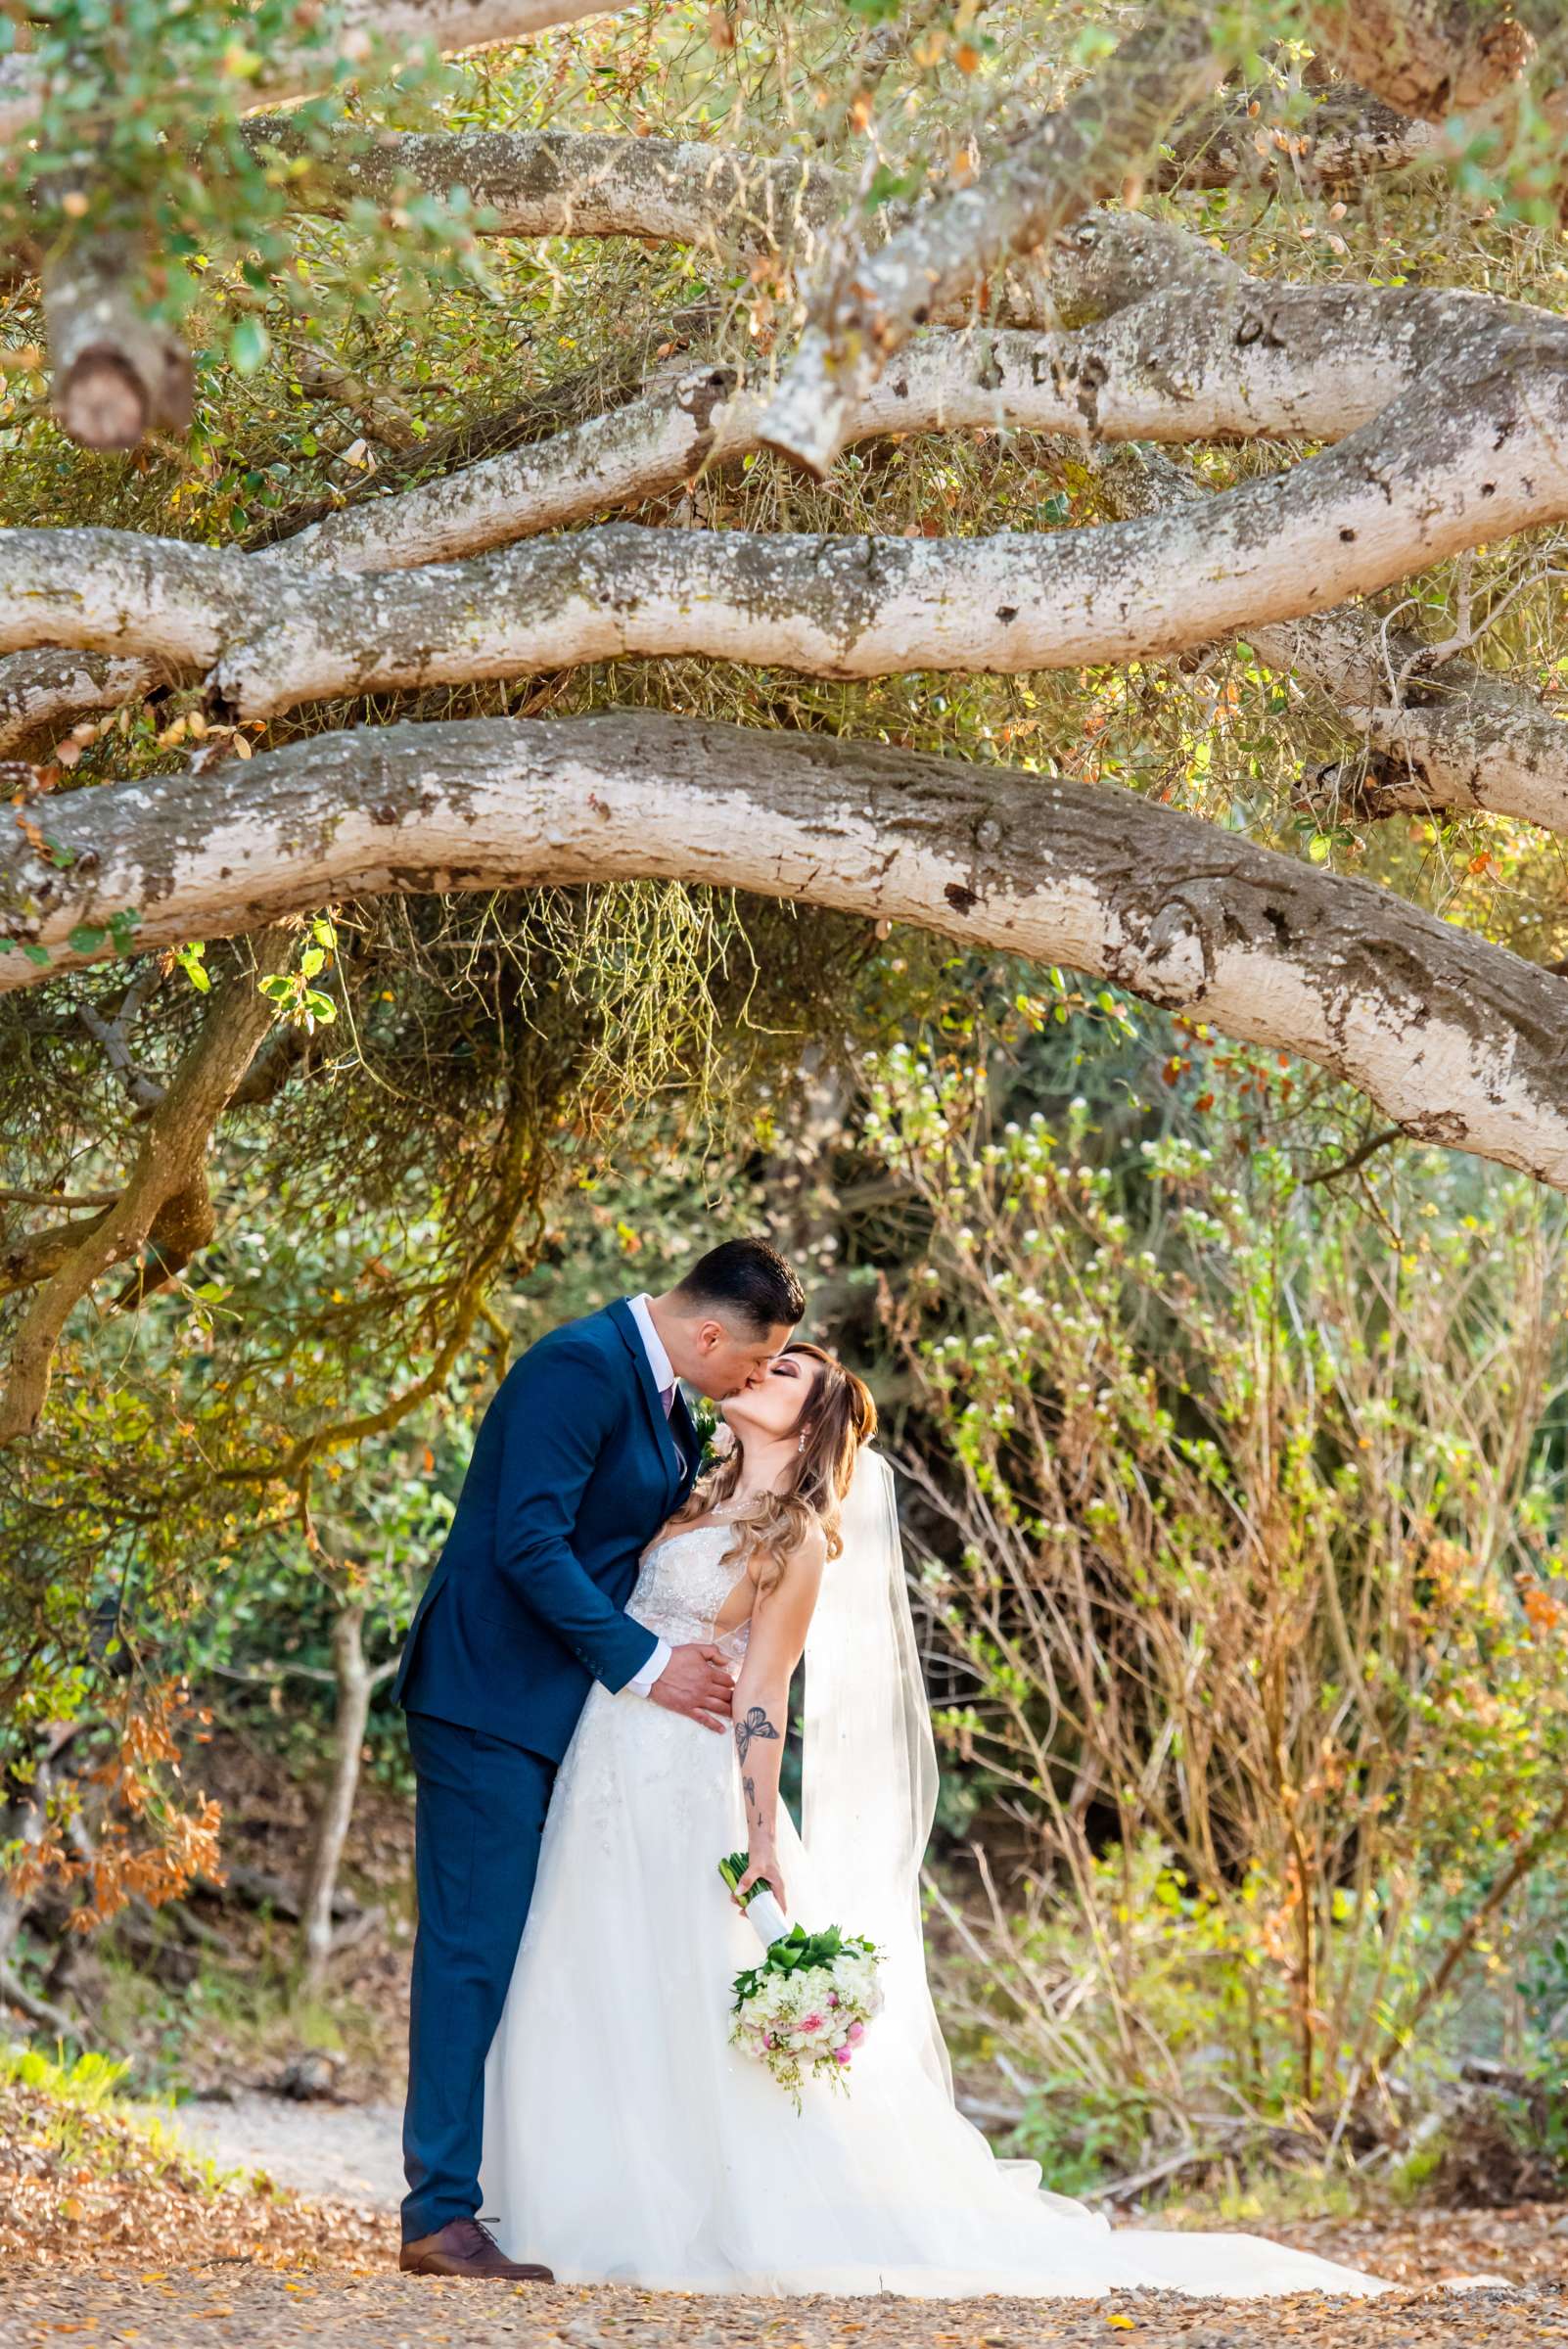 Cuvier Park-The Wedding Bowl Wedding, Ruby and Moises Wedding Photo #10 by True Photography